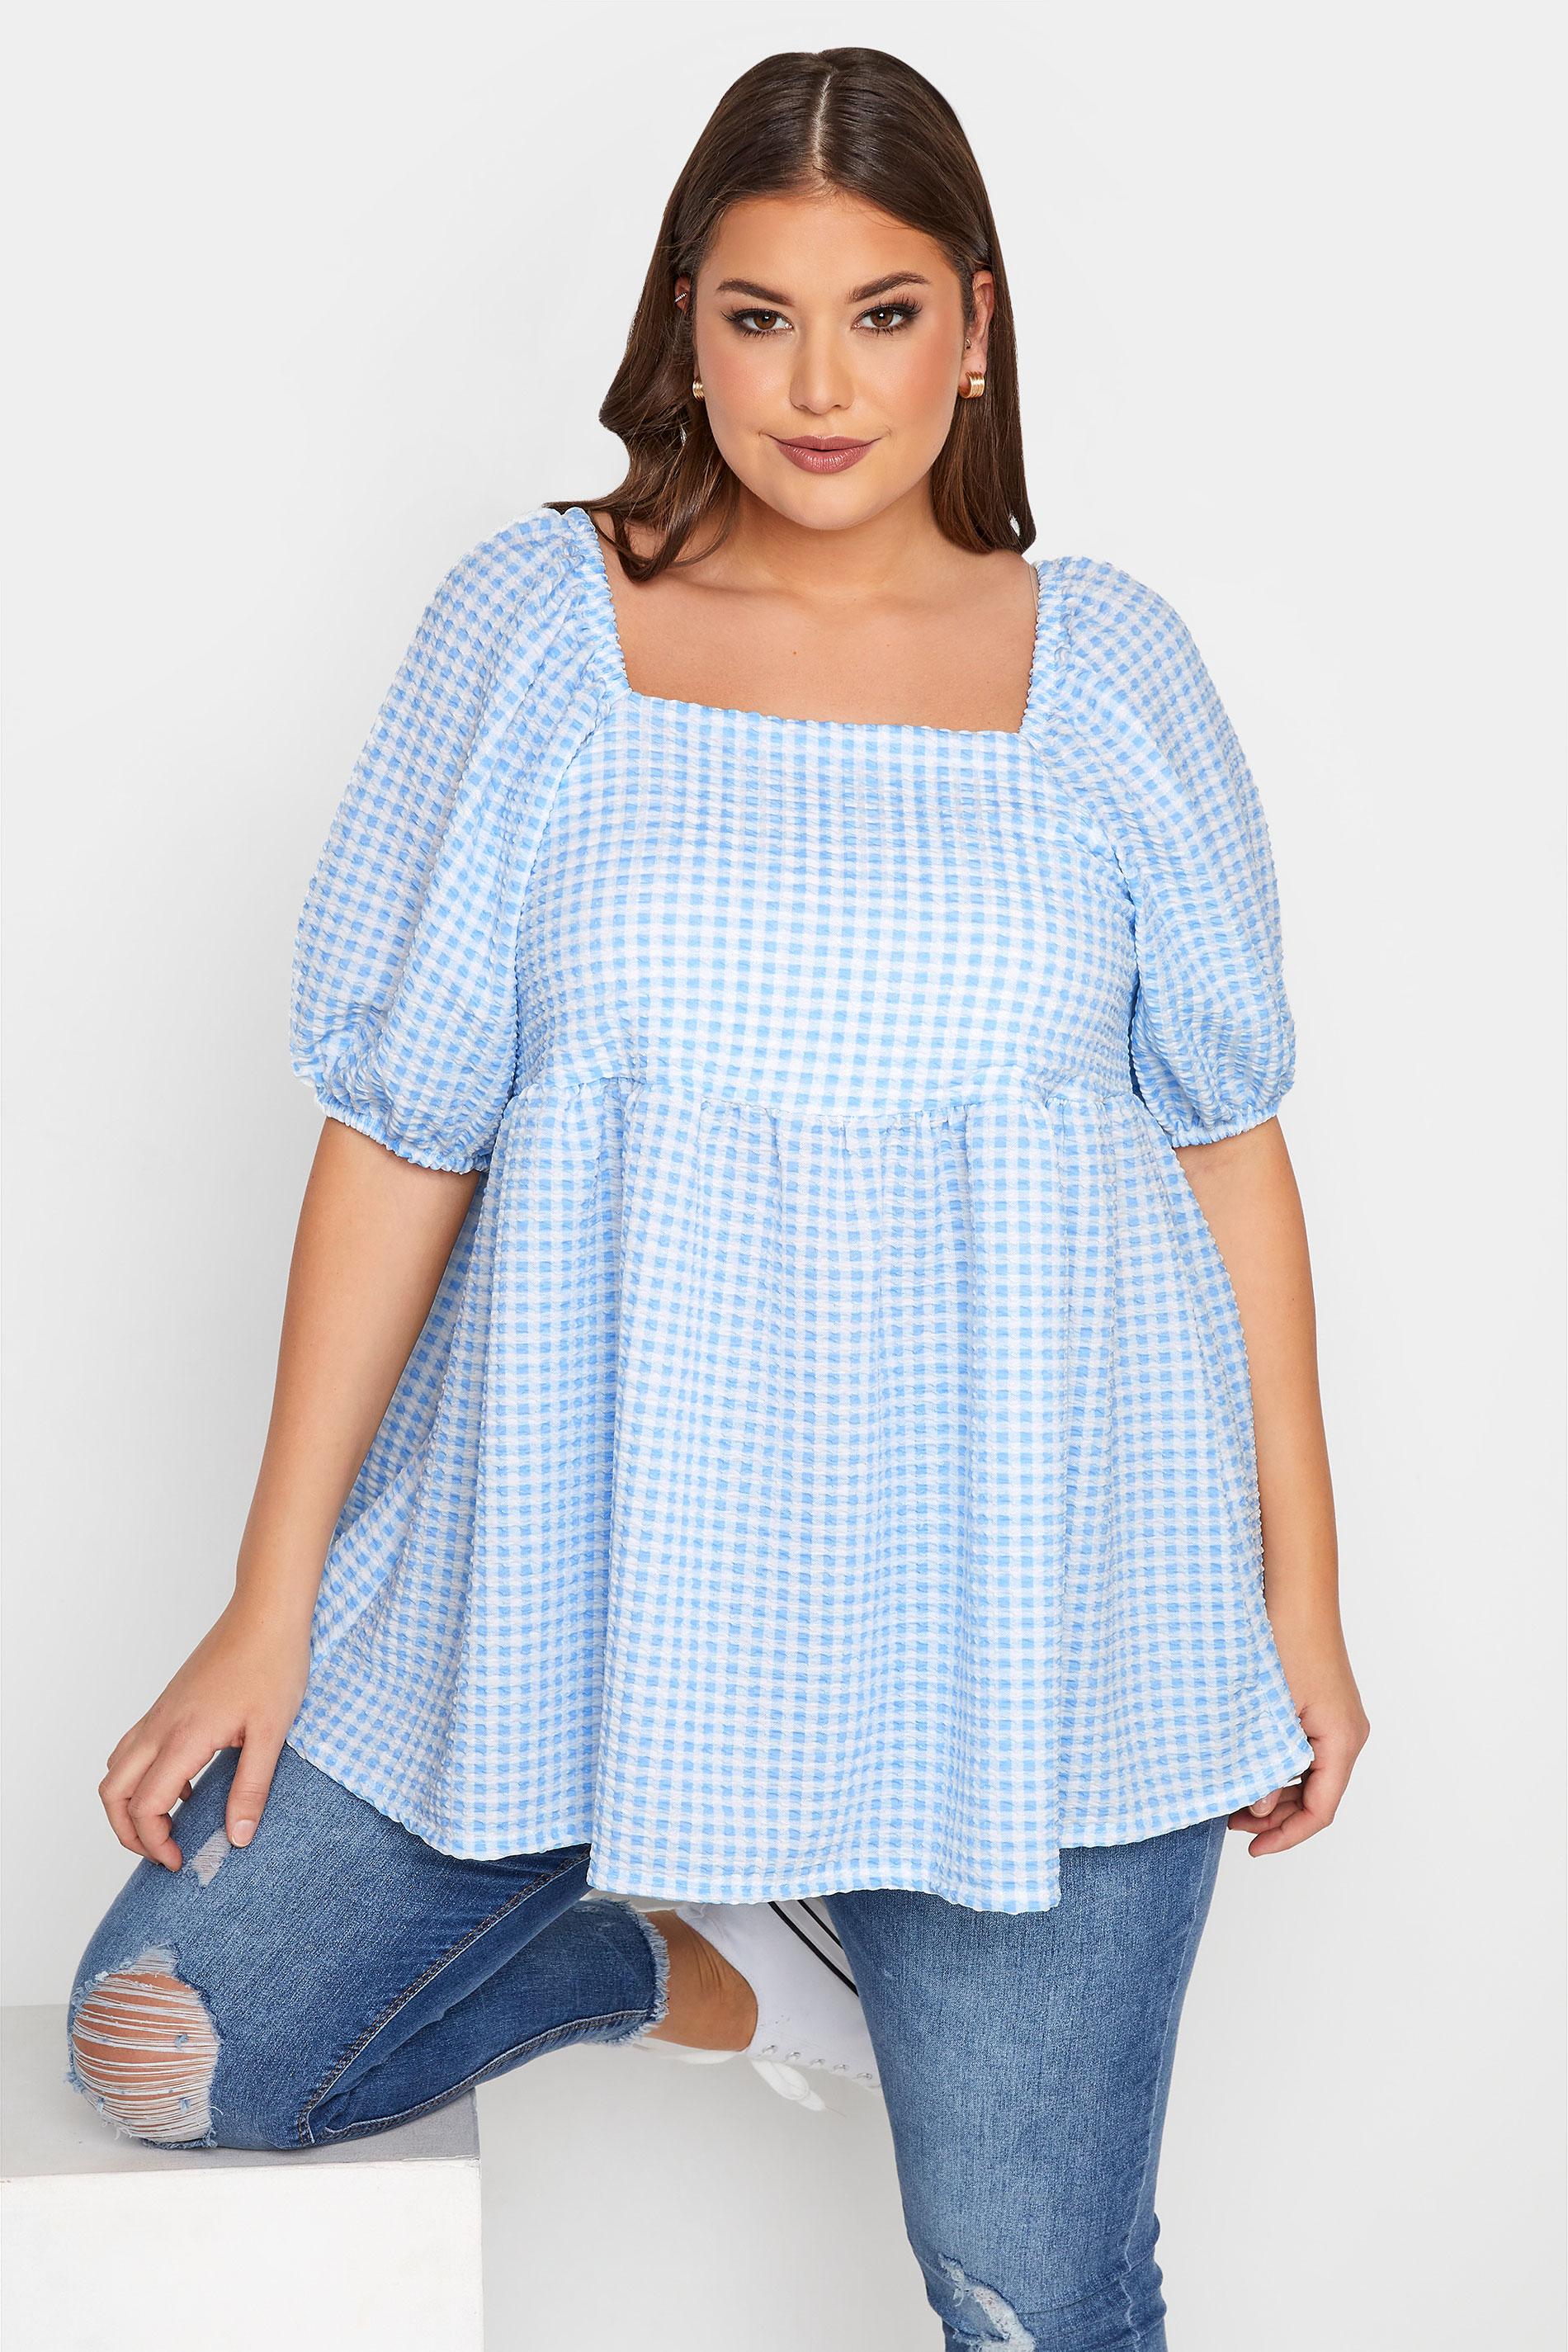 LIMITED COLLECTION Curve Blue Gingham Milkmaid Top_A.jpg